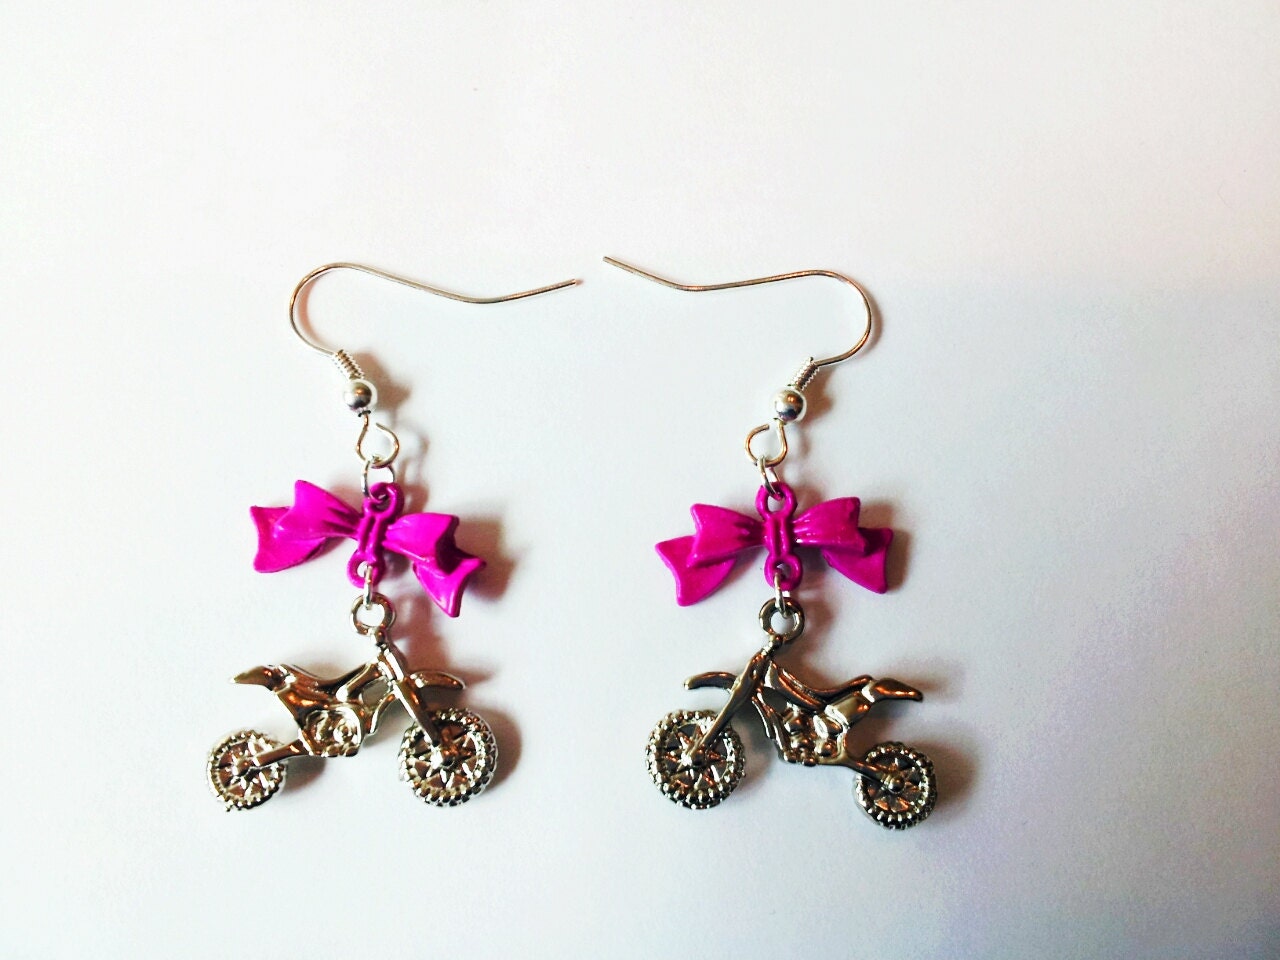 Dirt Bike earrings with Pink Bow